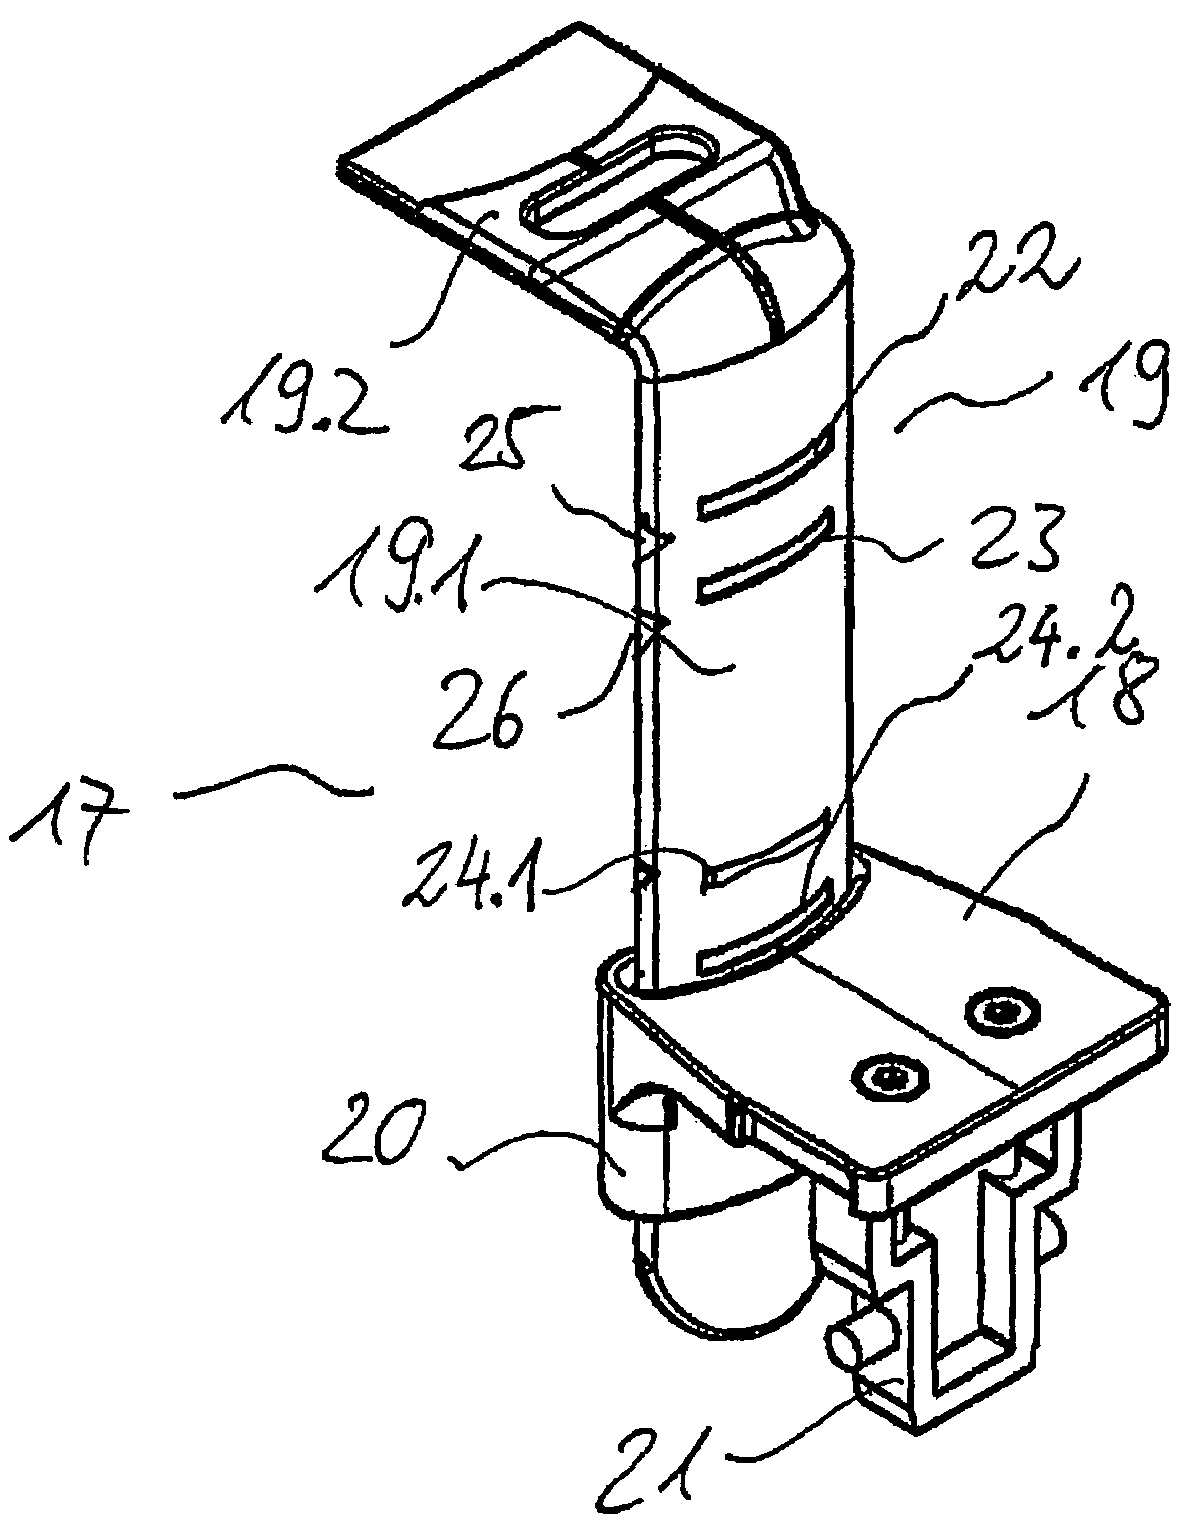 Patient positioning device of a panoramic dental X-ray apparatus